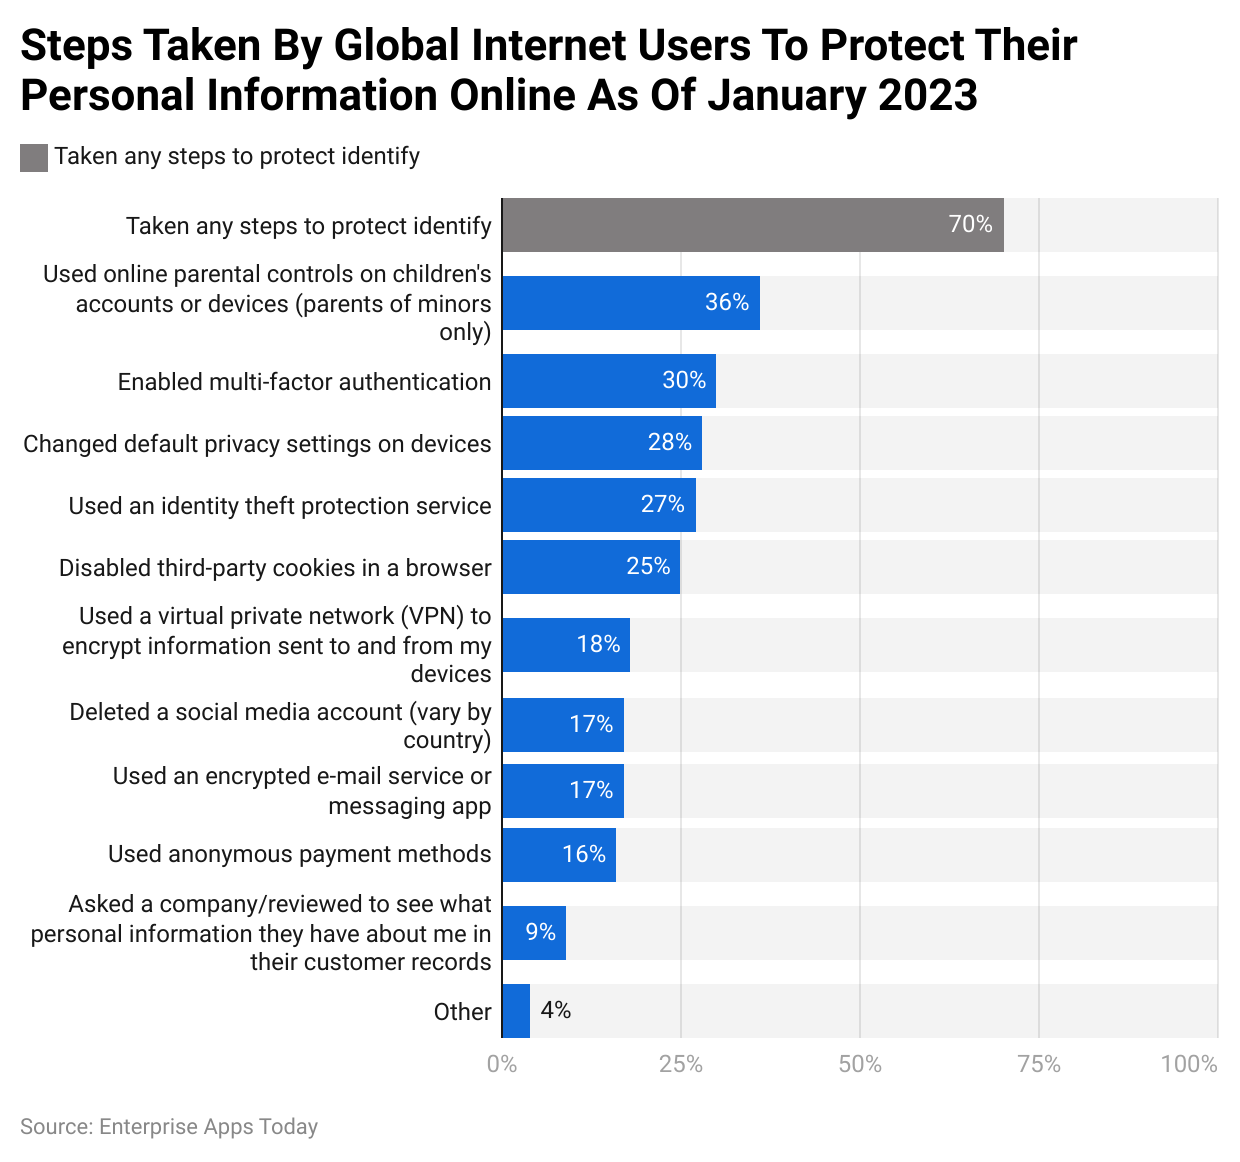 Steps Taken By Global Internet Users To Protect Their Personal Information Online As Of January 2023